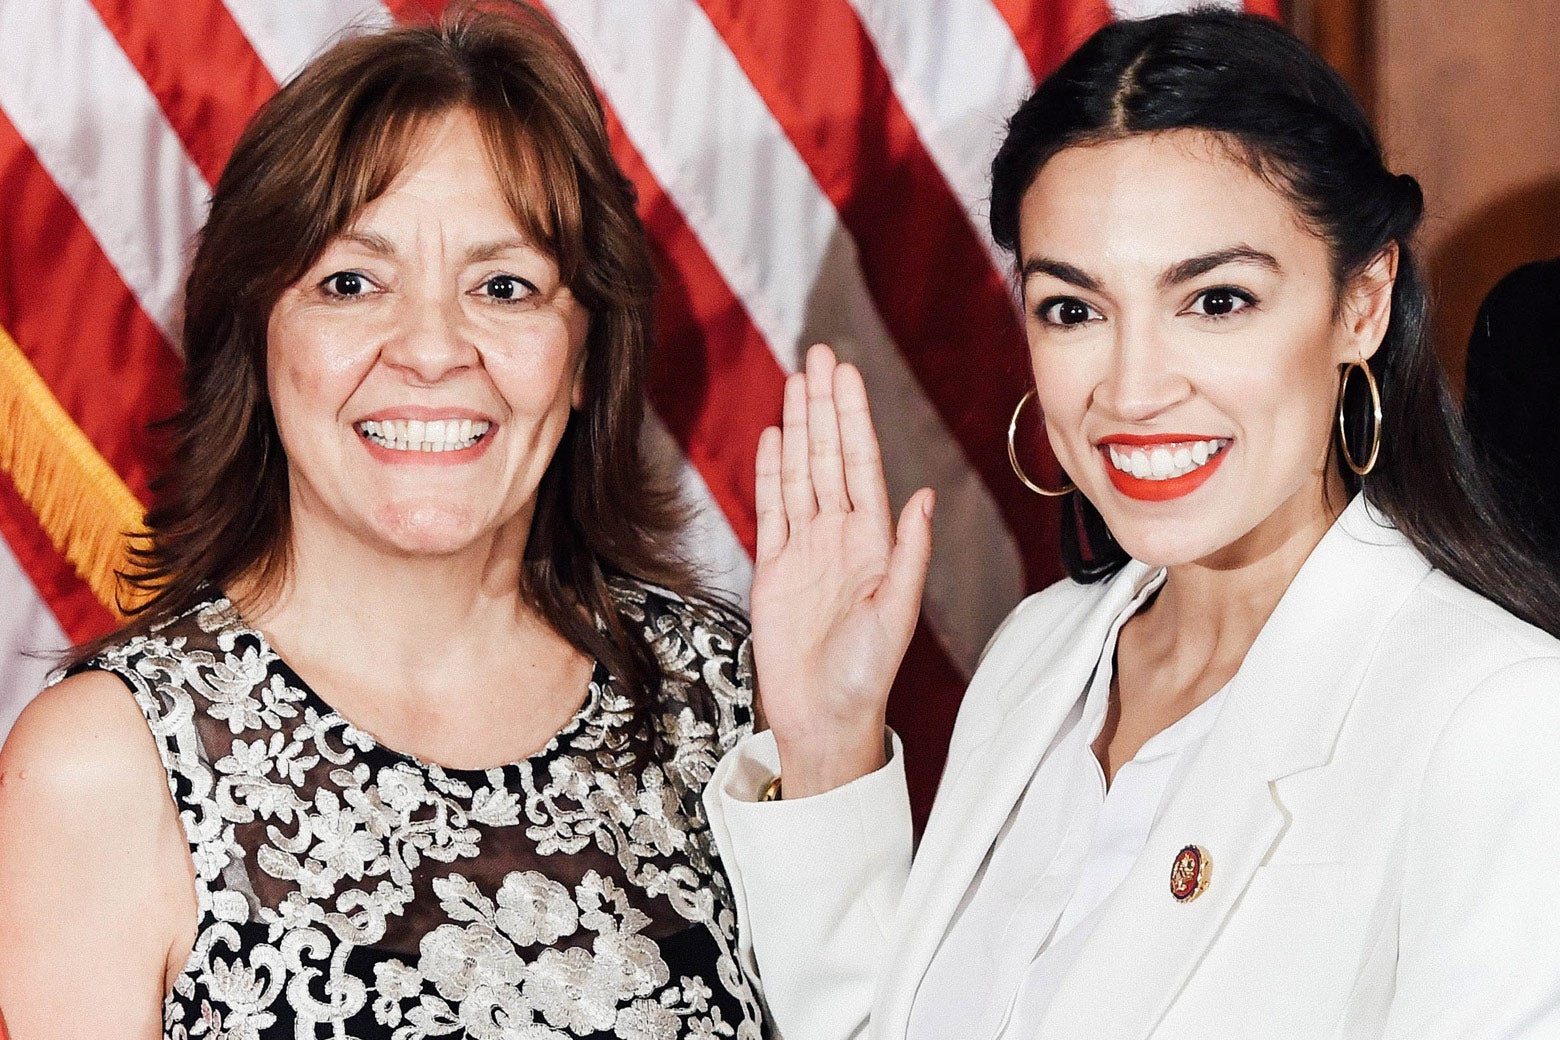 Blanca Ocasio-Cortez and Alexandria Ocasio-Cortez stand side by side against an American flag. AOC raises her right hand.